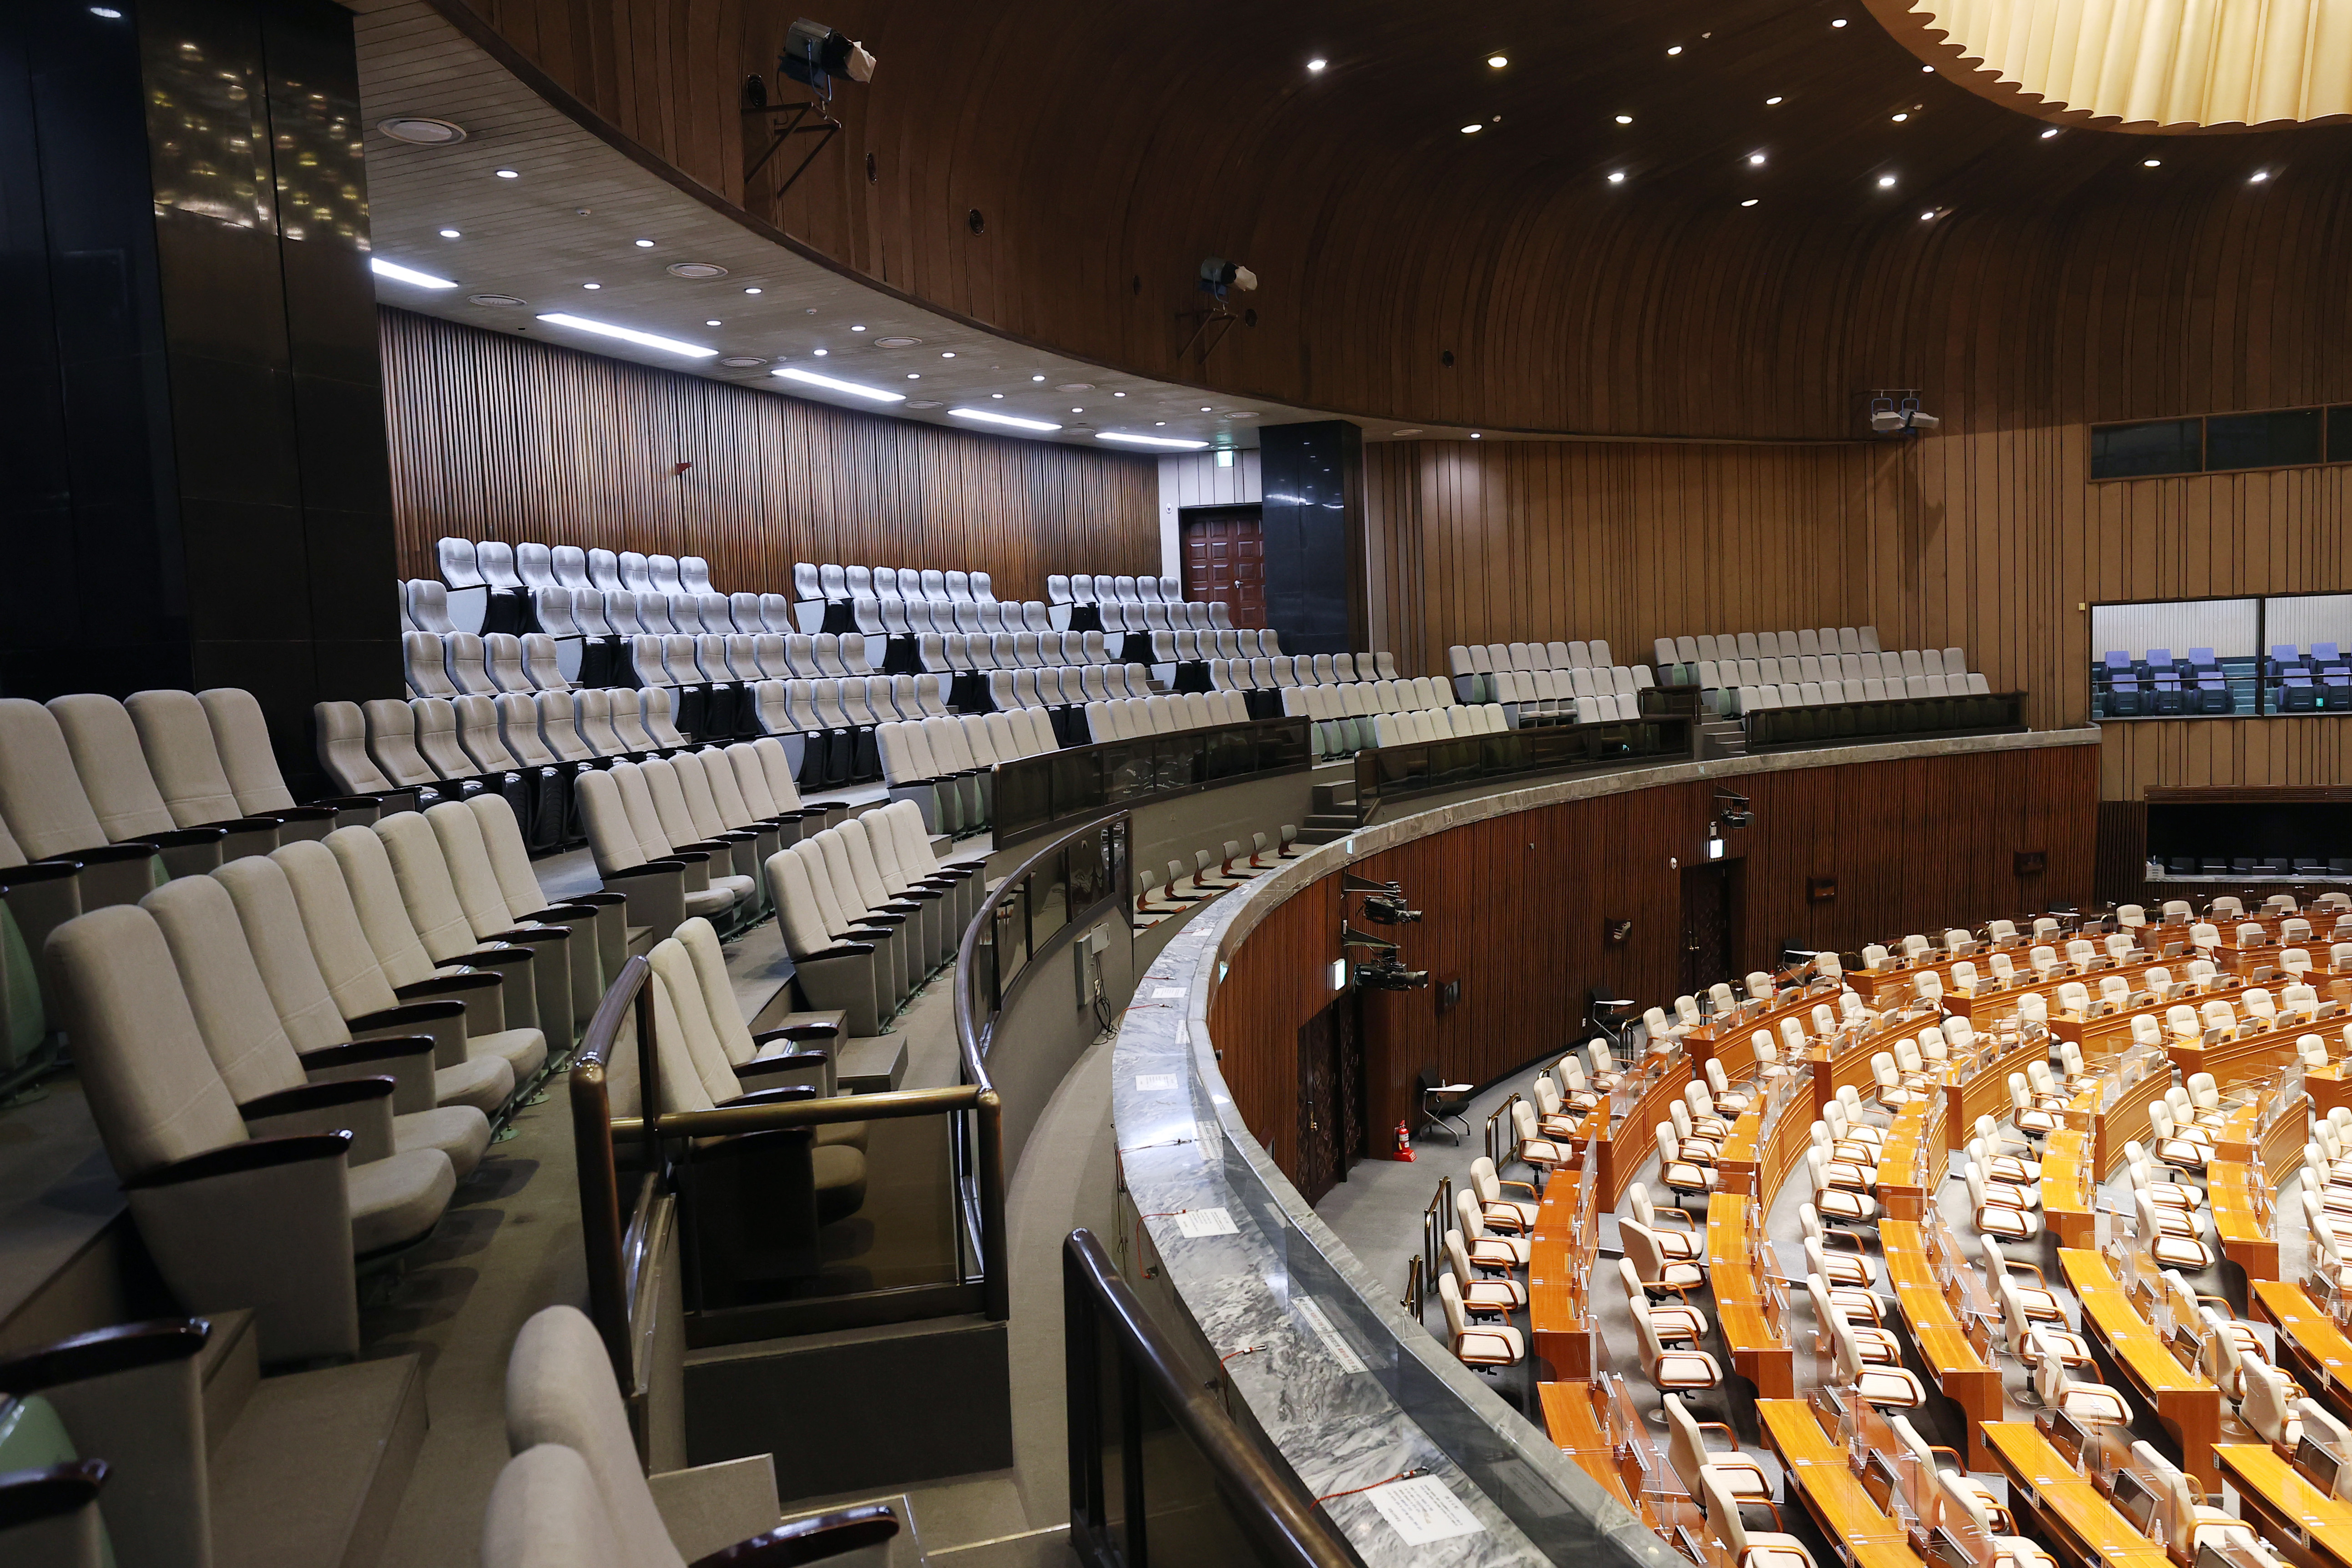 Public Gallery (Observation Seats)